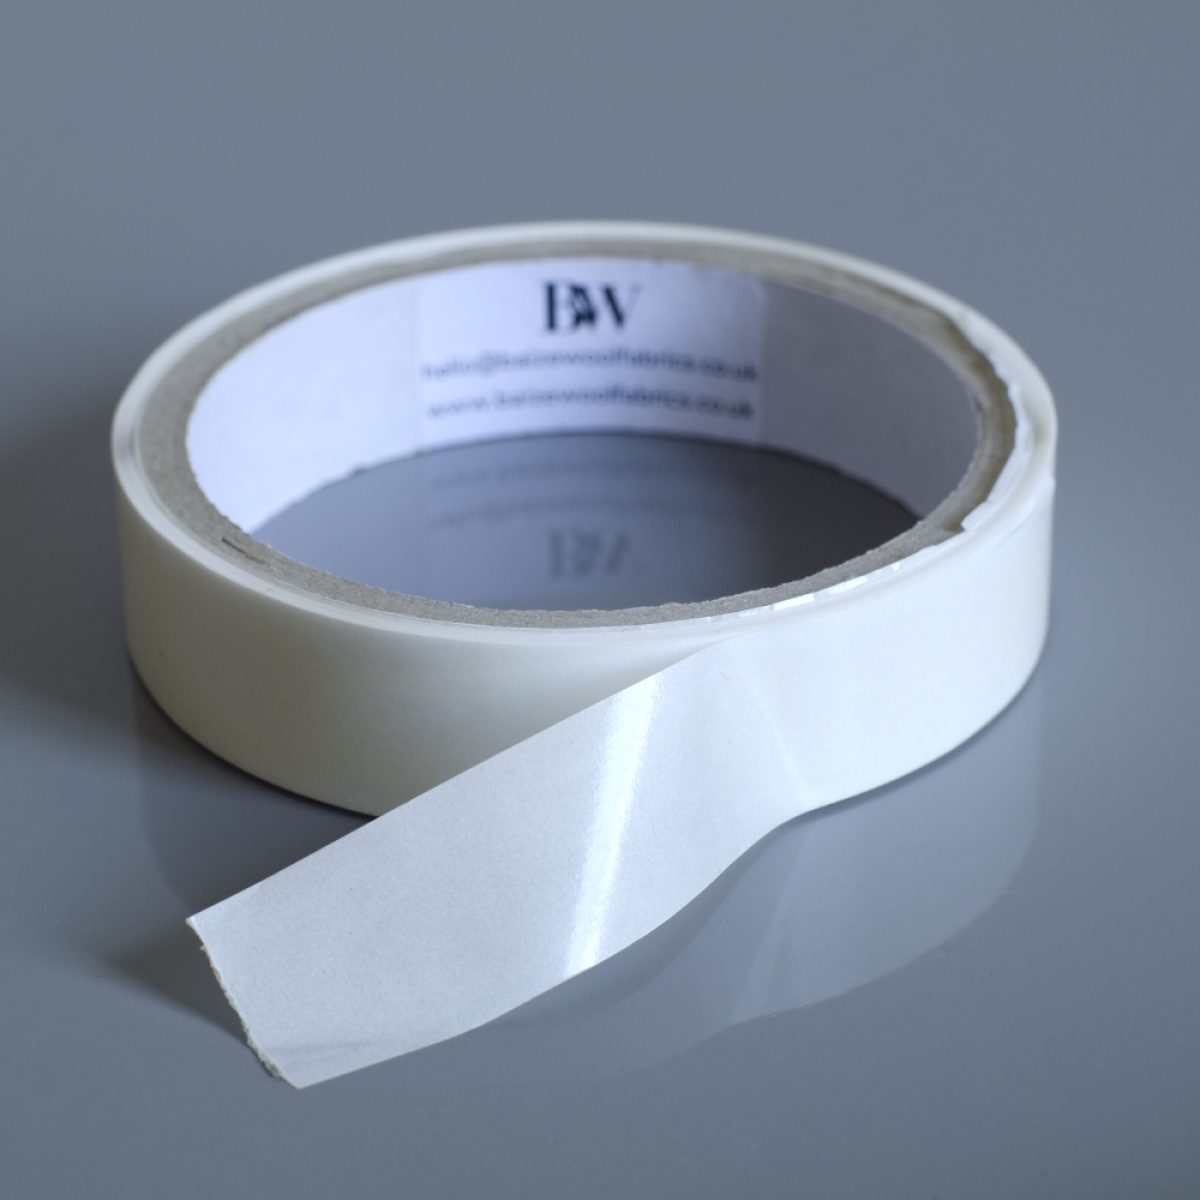 Adhesive Tape for Fabric - For Restoring Card Tables · Baize and Wool